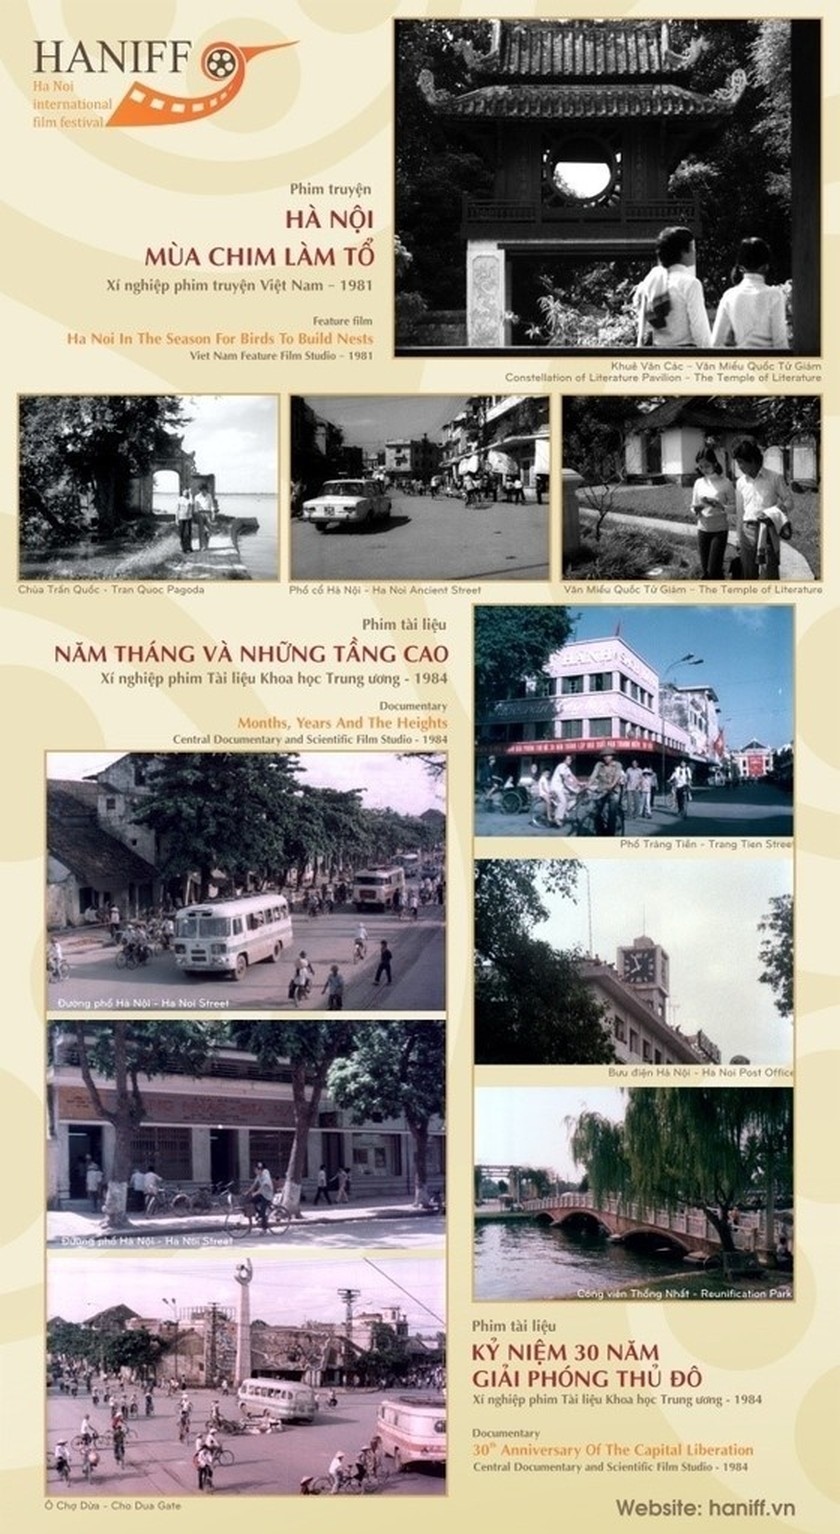 exhibition featuring hanoi s cultural heritages chosen for filming locations picture 1